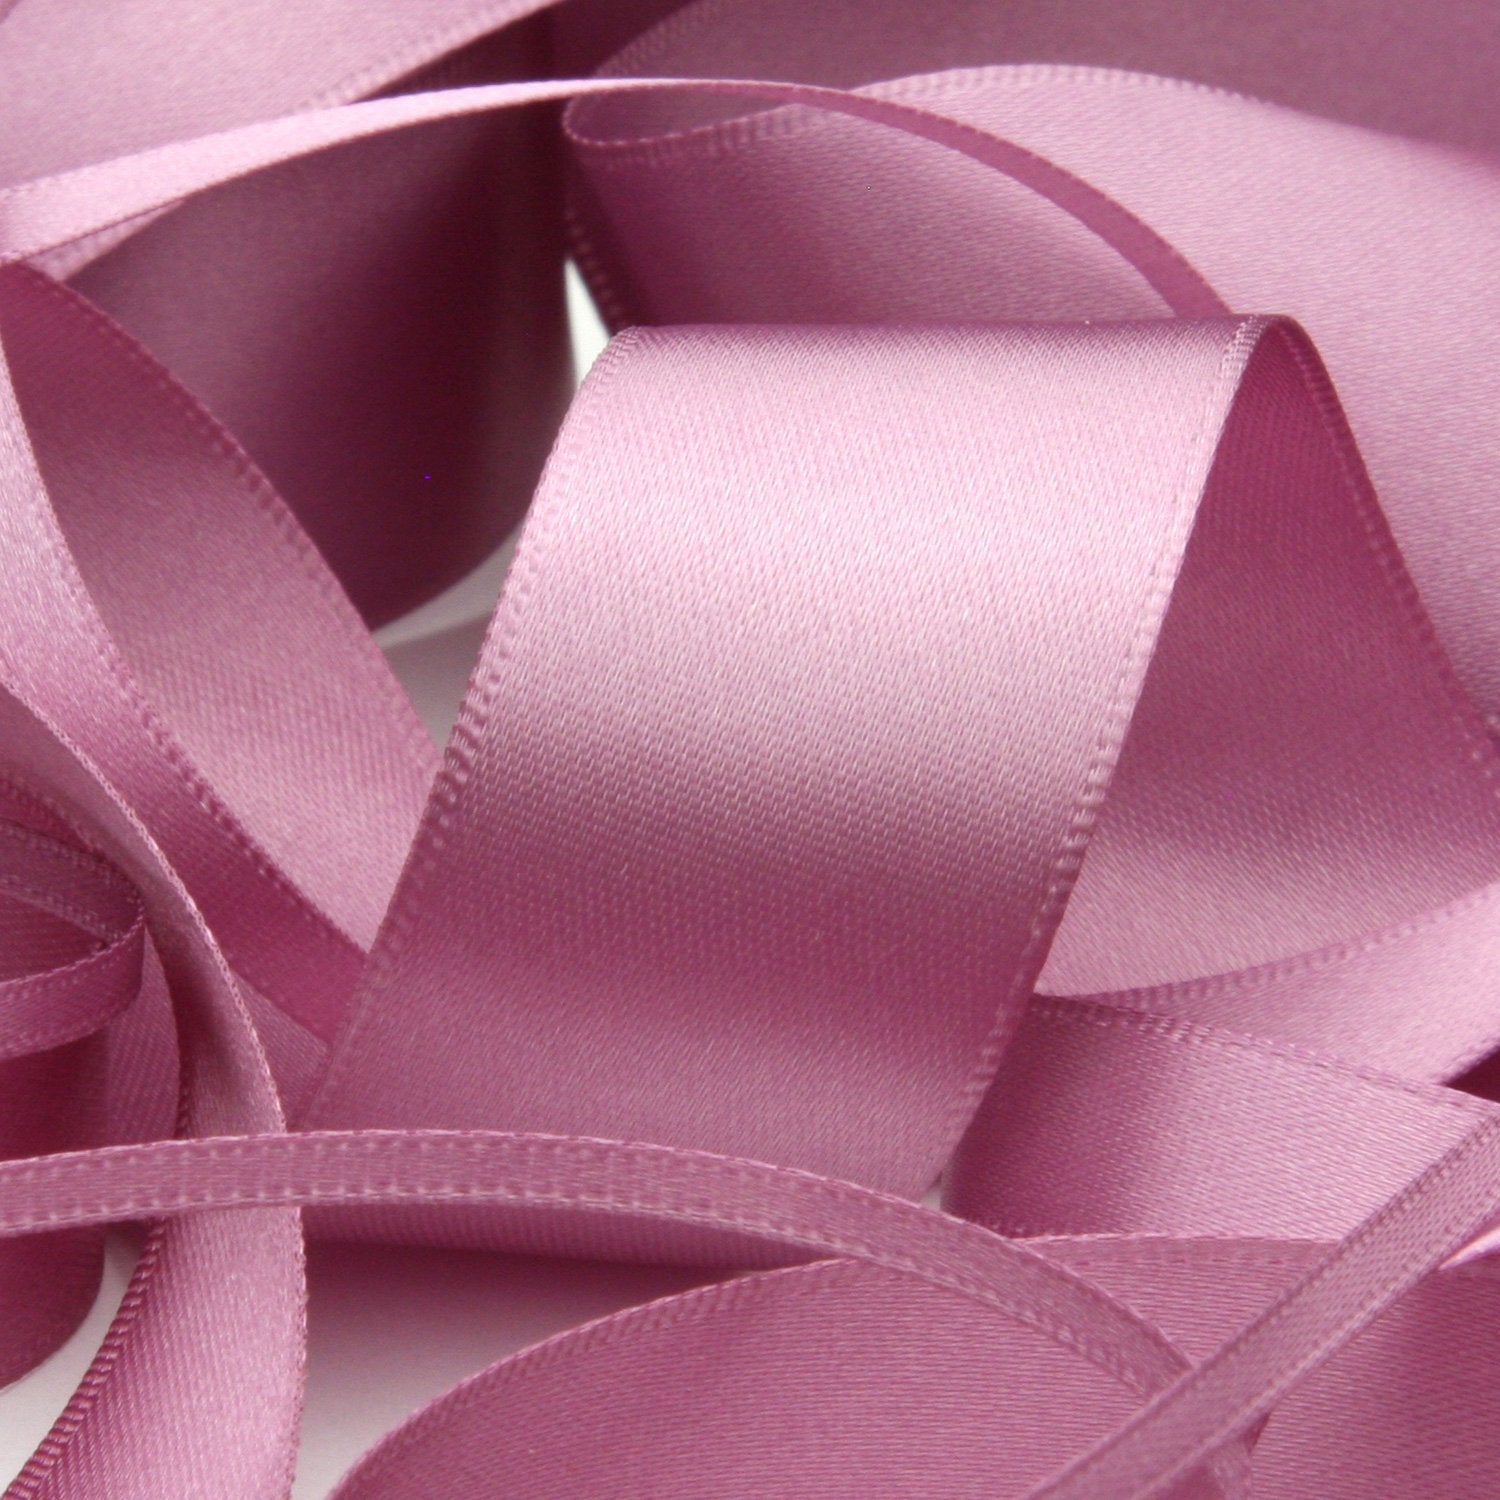 Dusty Rose Pink Double SatinRibbon